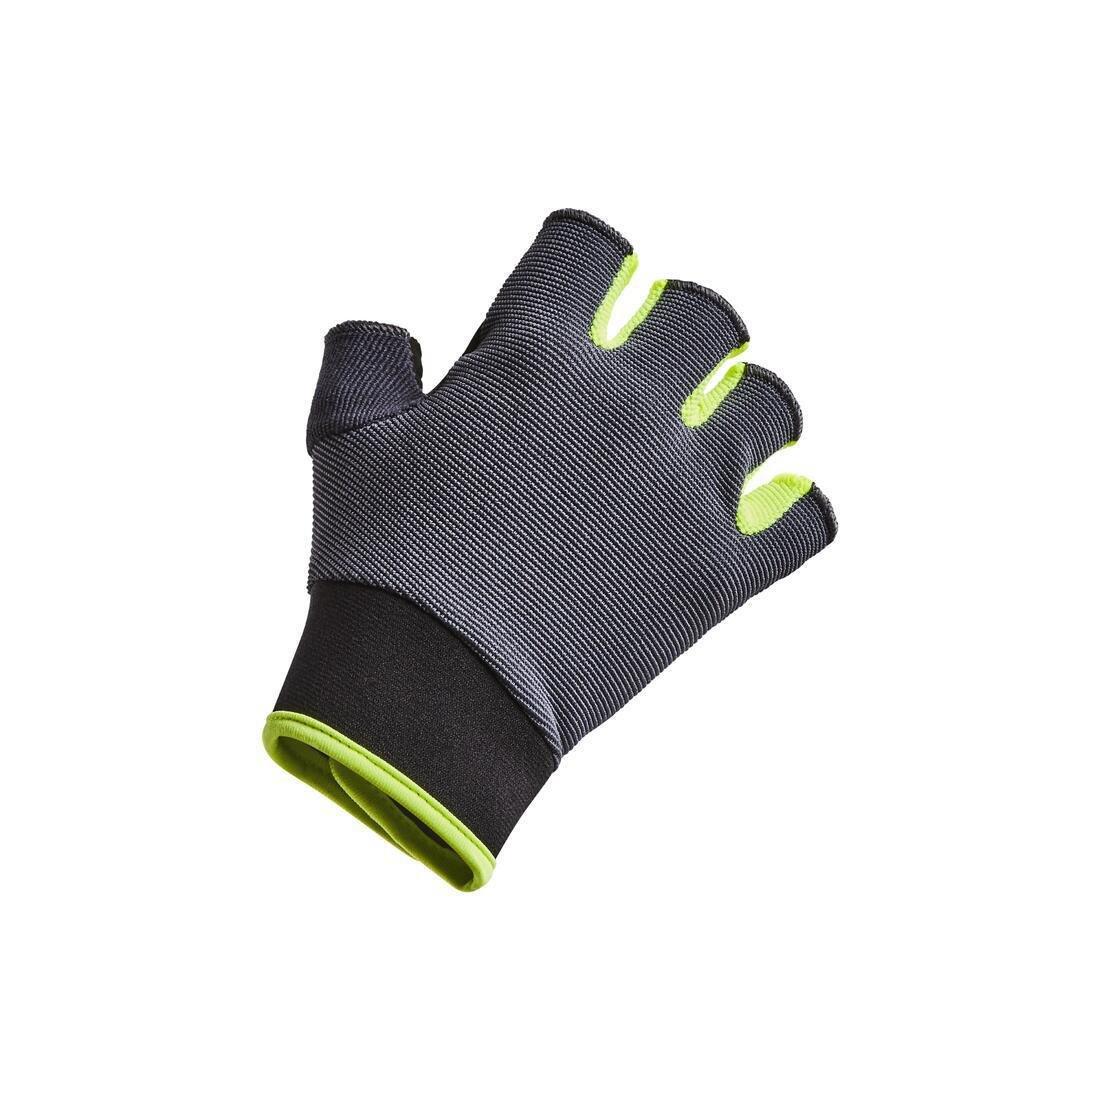 BTWIN - Kids' Cycling Gloves 500, Fluo lime yellow